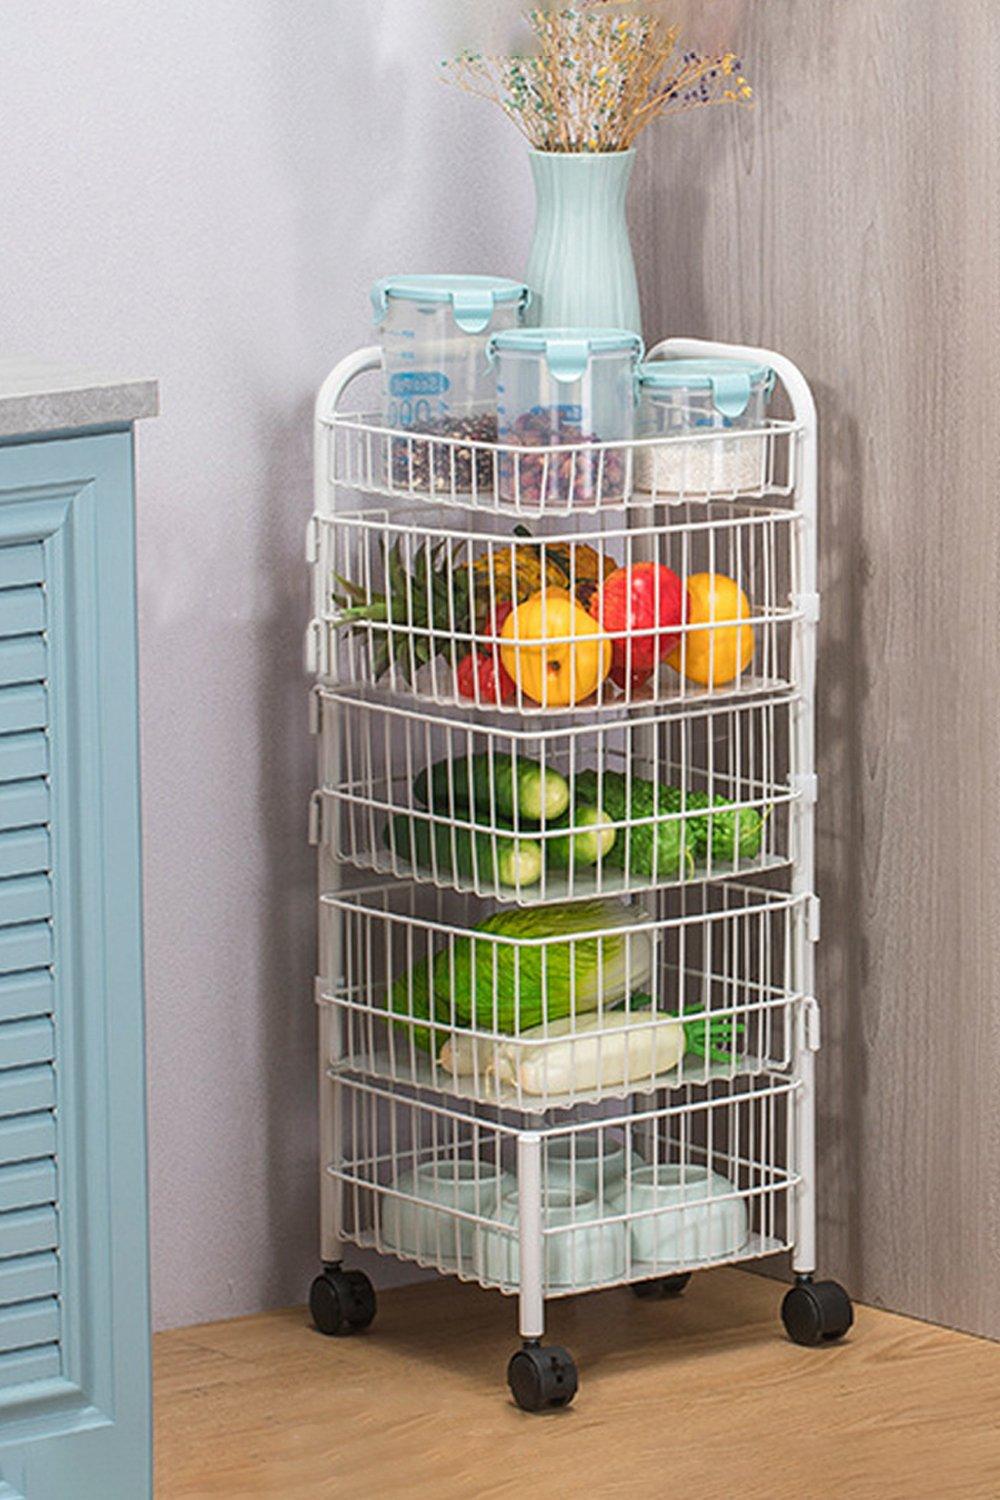 5-Layer Iron Wire Rotating Trolley Cart Scalable Spice Rack Vegetable Fruit Storage Basket Organizer